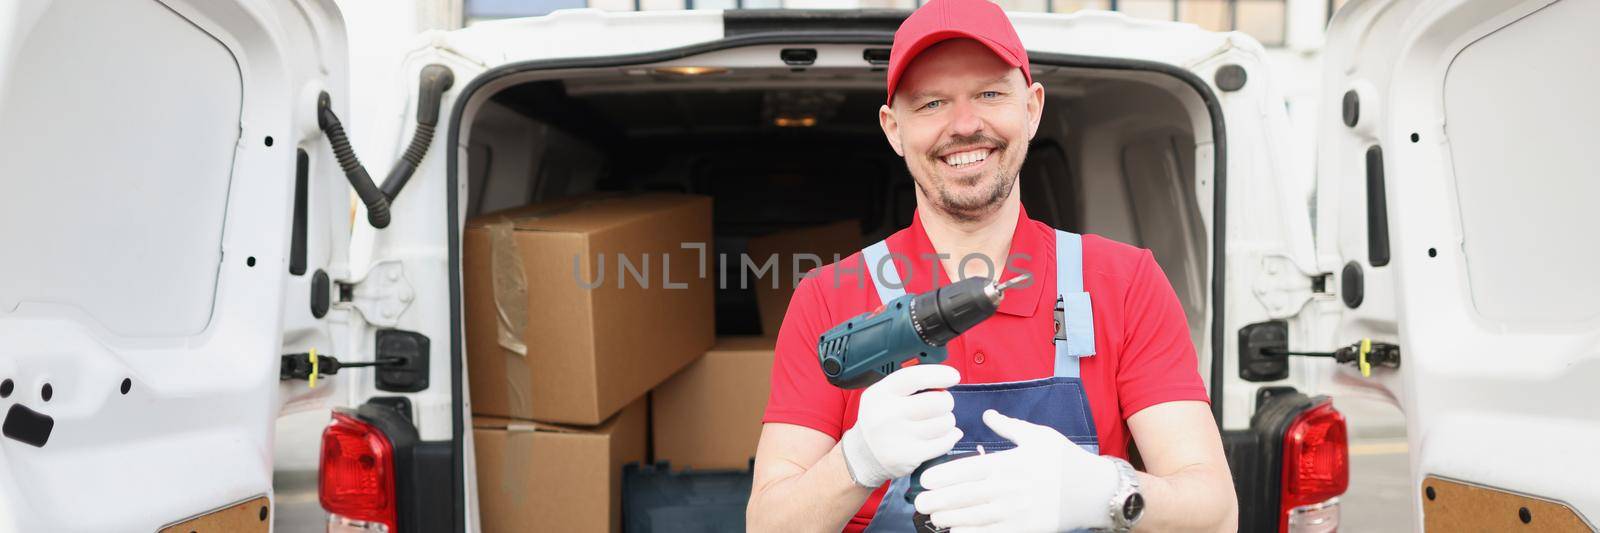 Portrait of smiling worker hold screwdriver device in hand in front of truck full of boxes. Man help to fix things or with moving. Handyman service concept